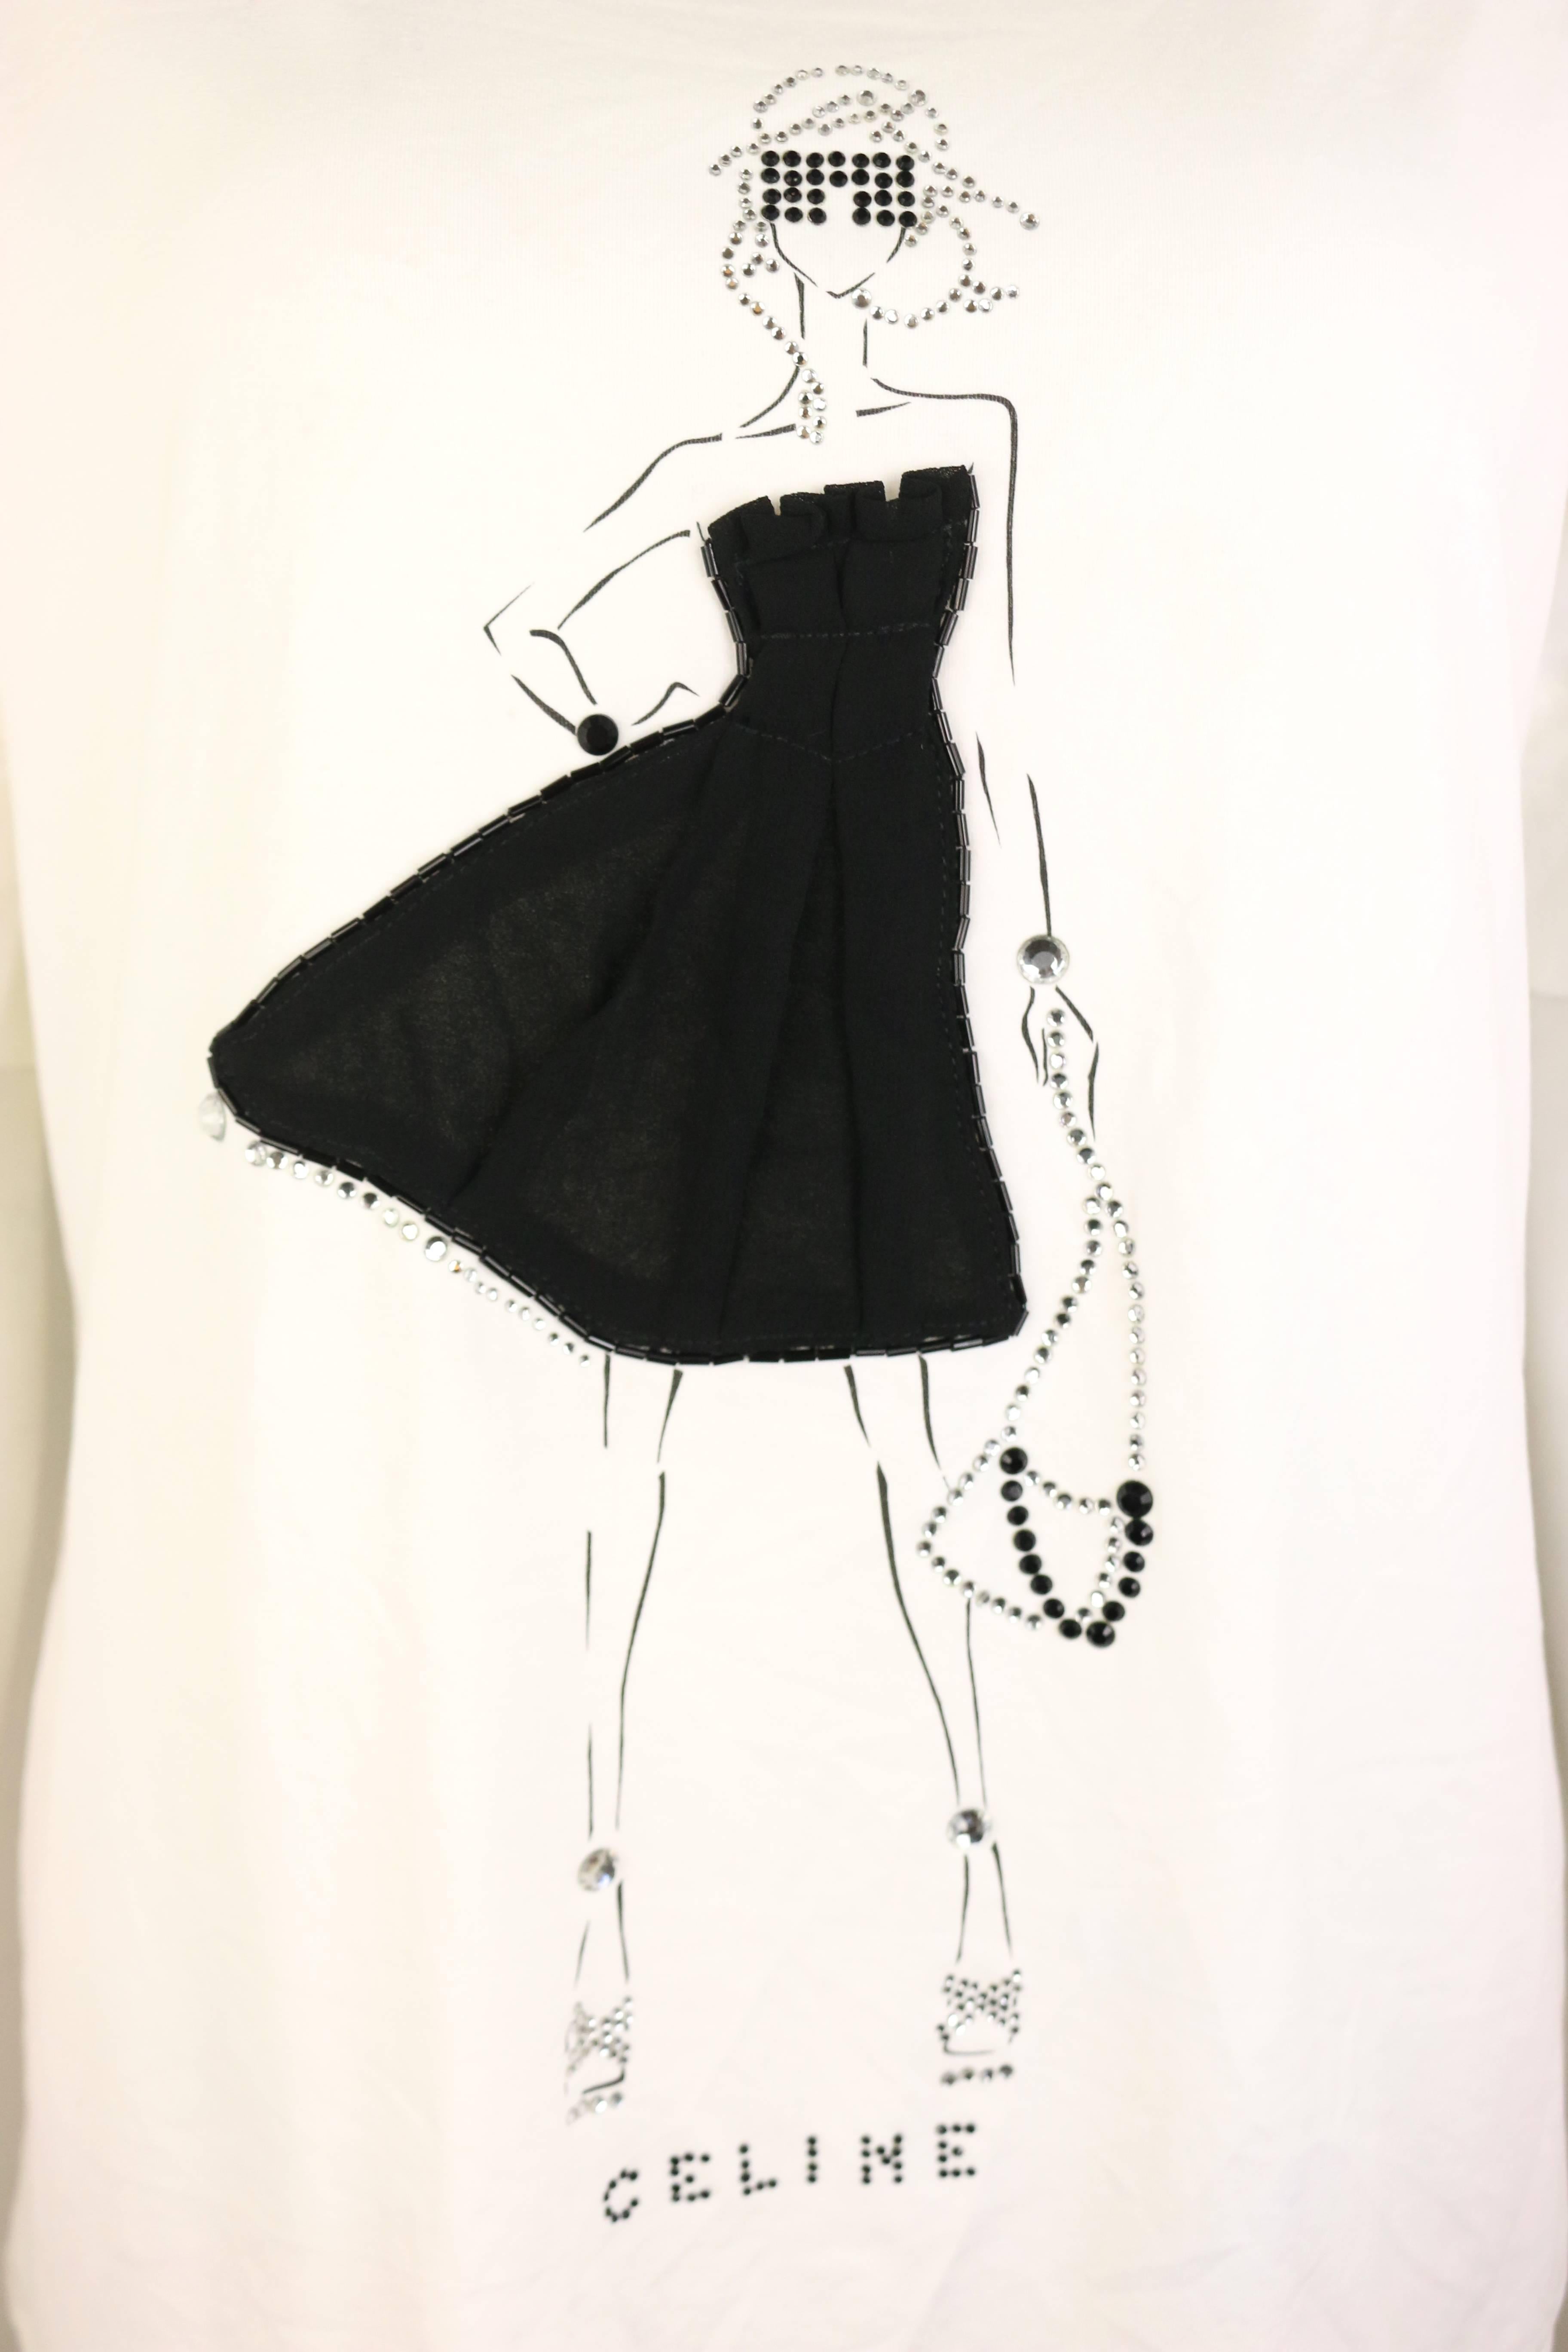 - Celine white with black/silver rhinestones girl print cotton t-shirt. 

- Featuring the girl print wears a black tube top fabric dress with black beads and silver rhinestones accessories outline. 

- Size XL. 

- 90% Cotton, 10% Elastane. 